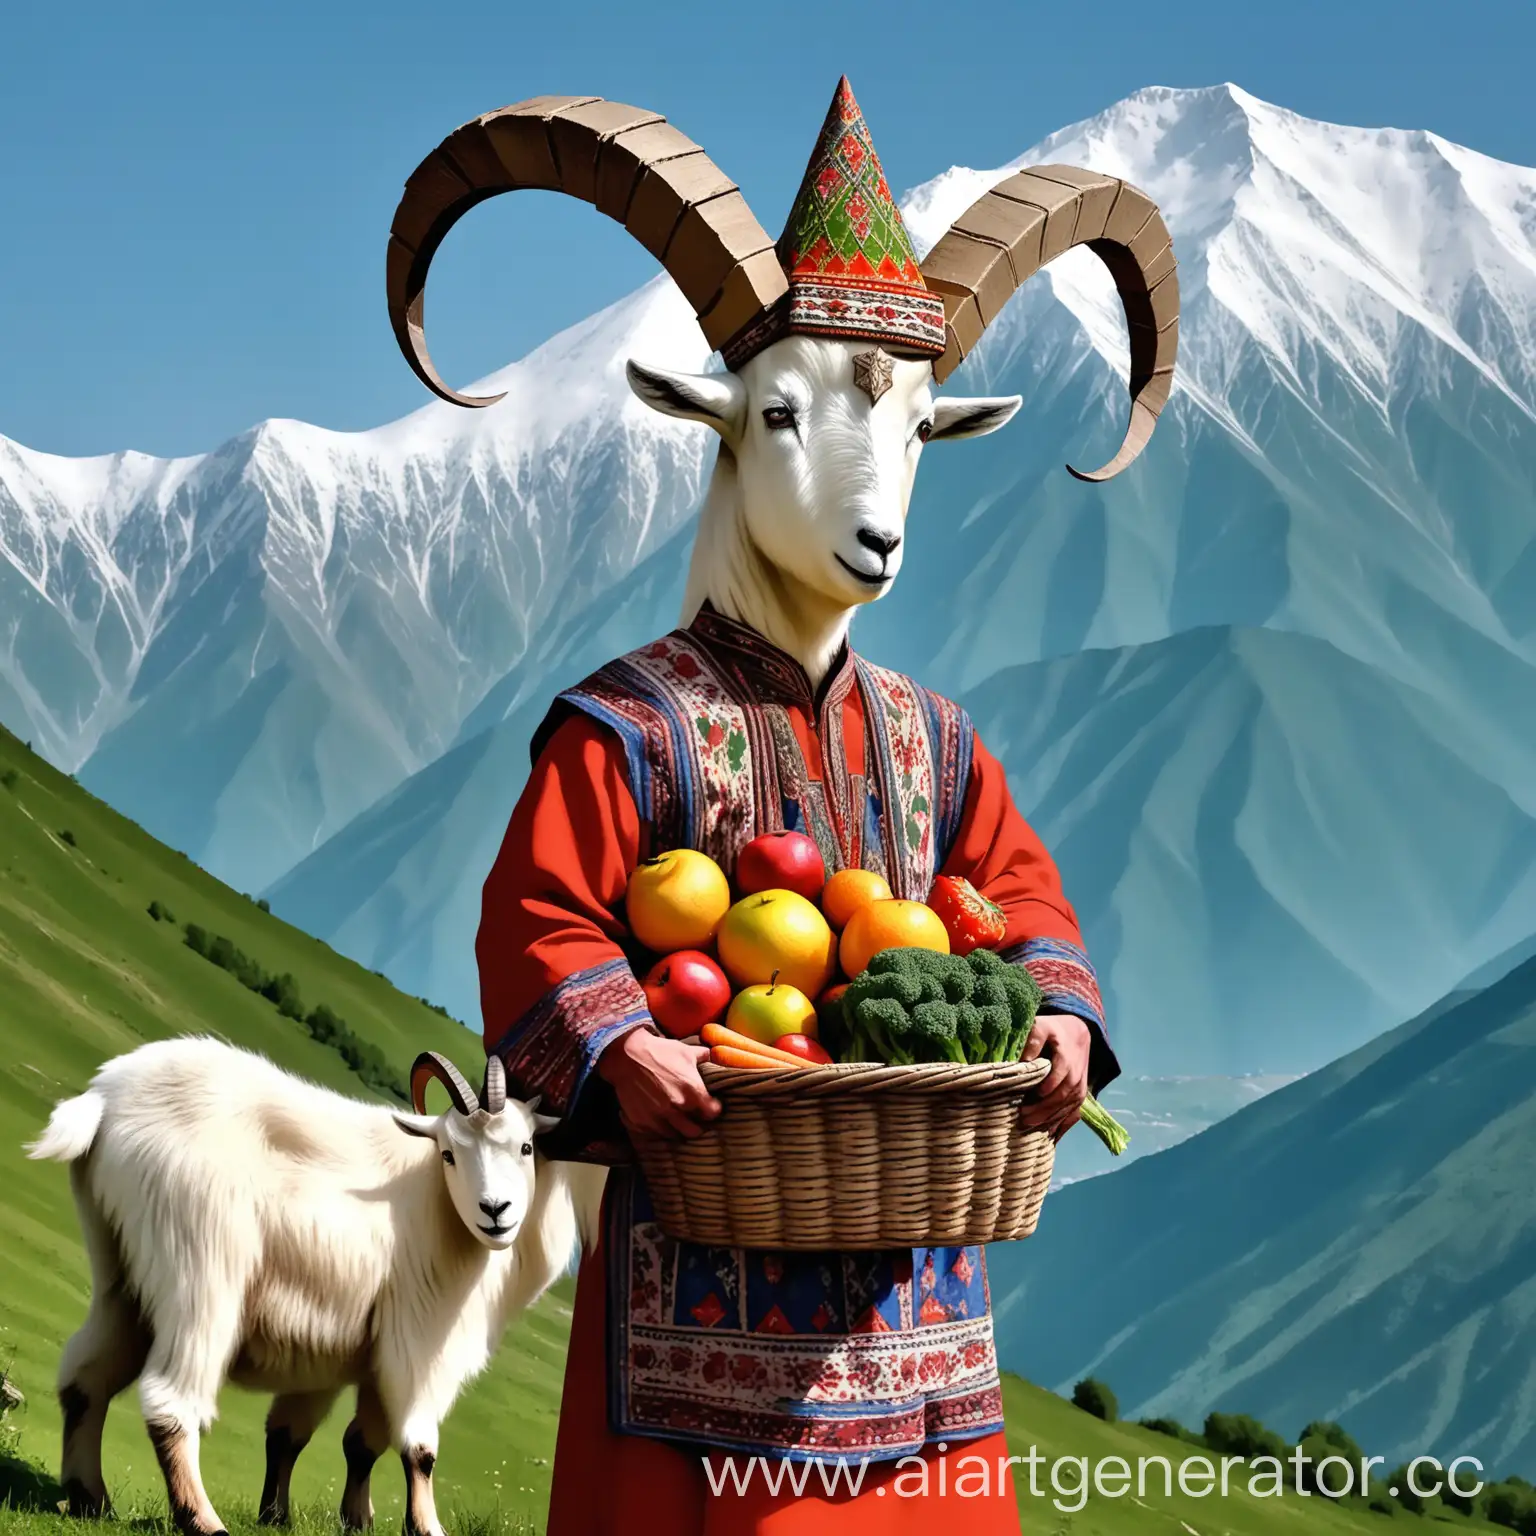 Caucasian-Mountain-Goat-in-Traditional-Attire-Holding-a-Basket-of-Fresh-Produce